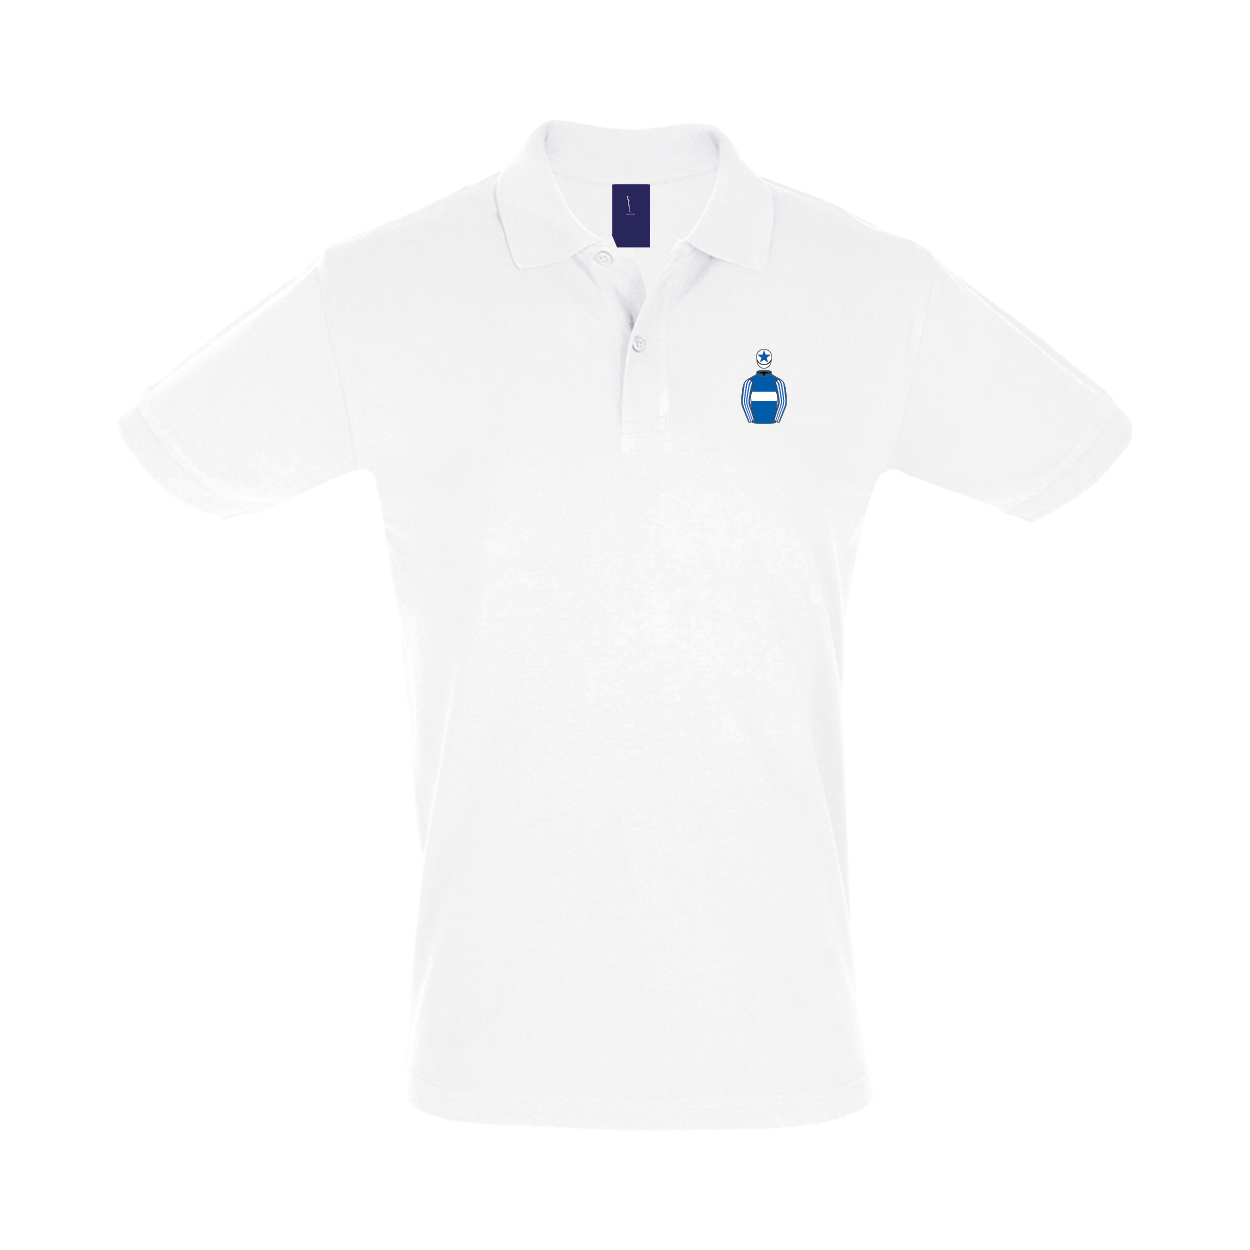 Mens King Power Racing Embroidered Polo Shirt - Clothing - Hacked Up